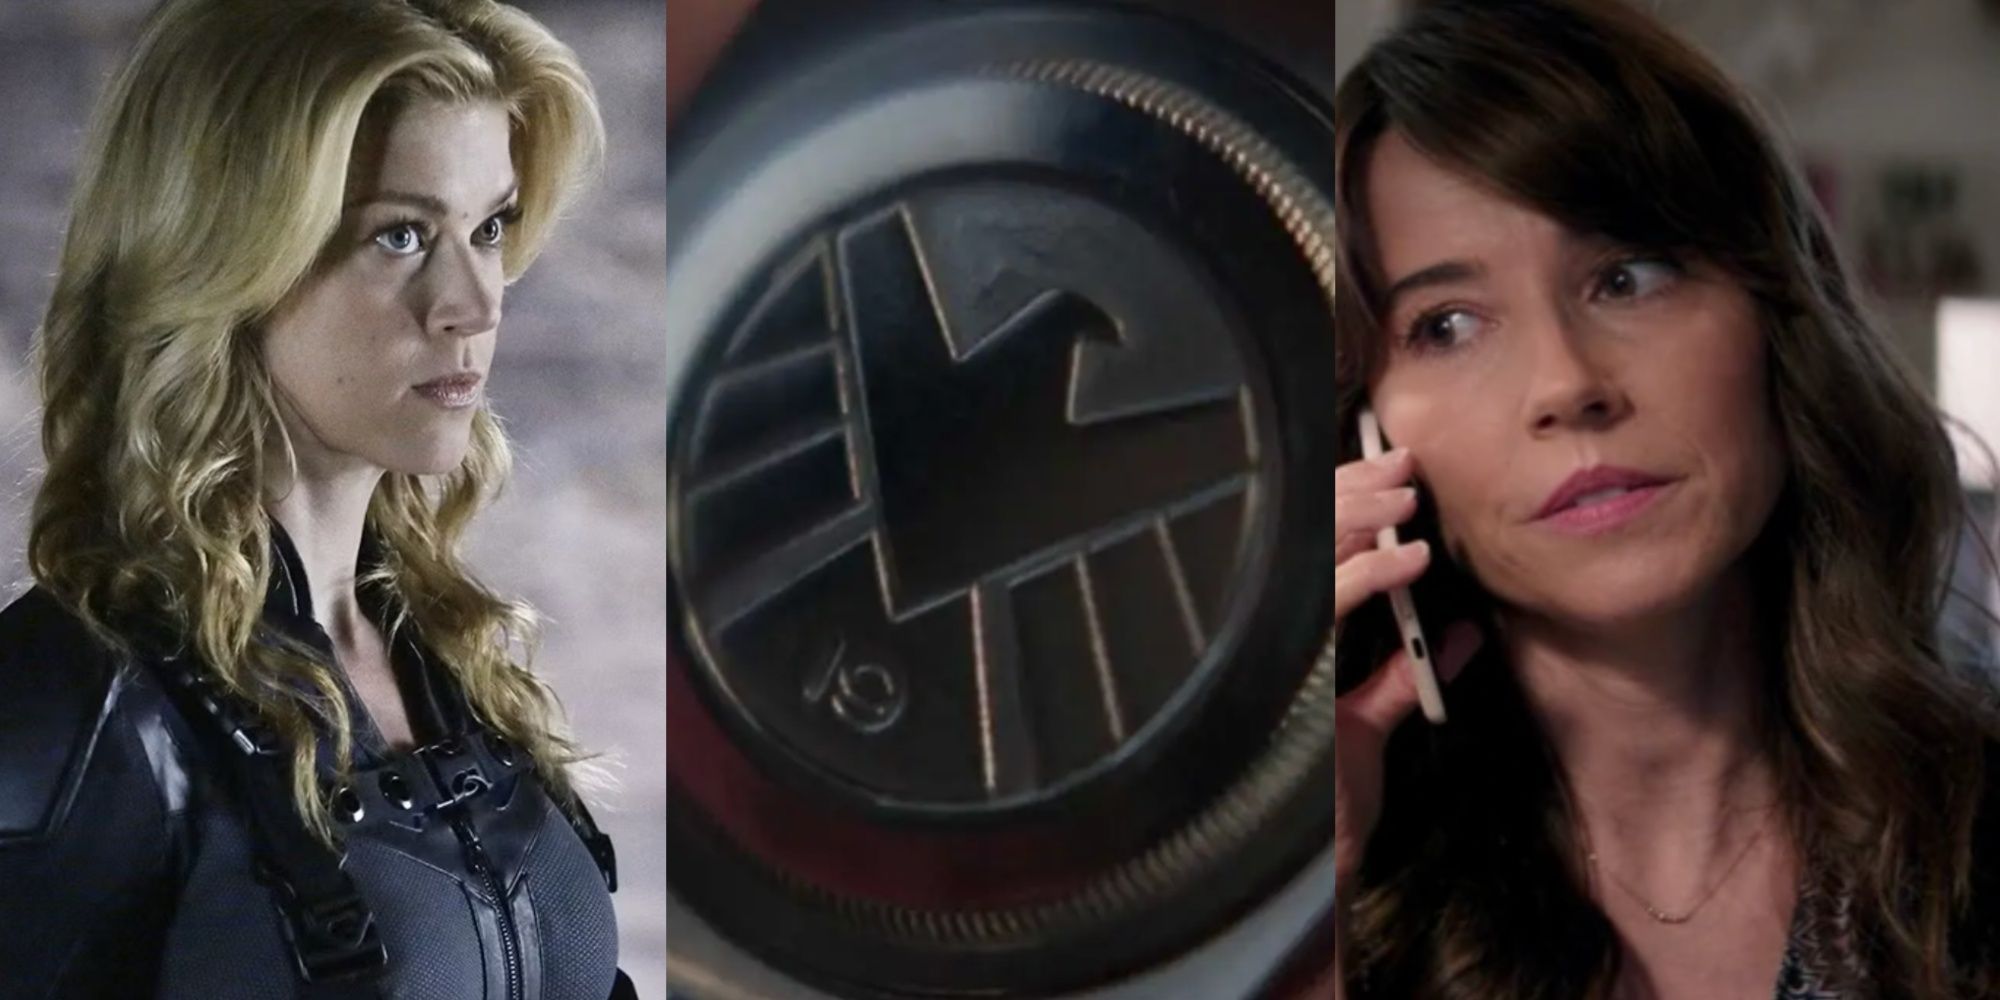 A split image features Adrianne Palicki, the back of Agent 19's SHIELD watch, and Linda Cardellini as Laura Barton